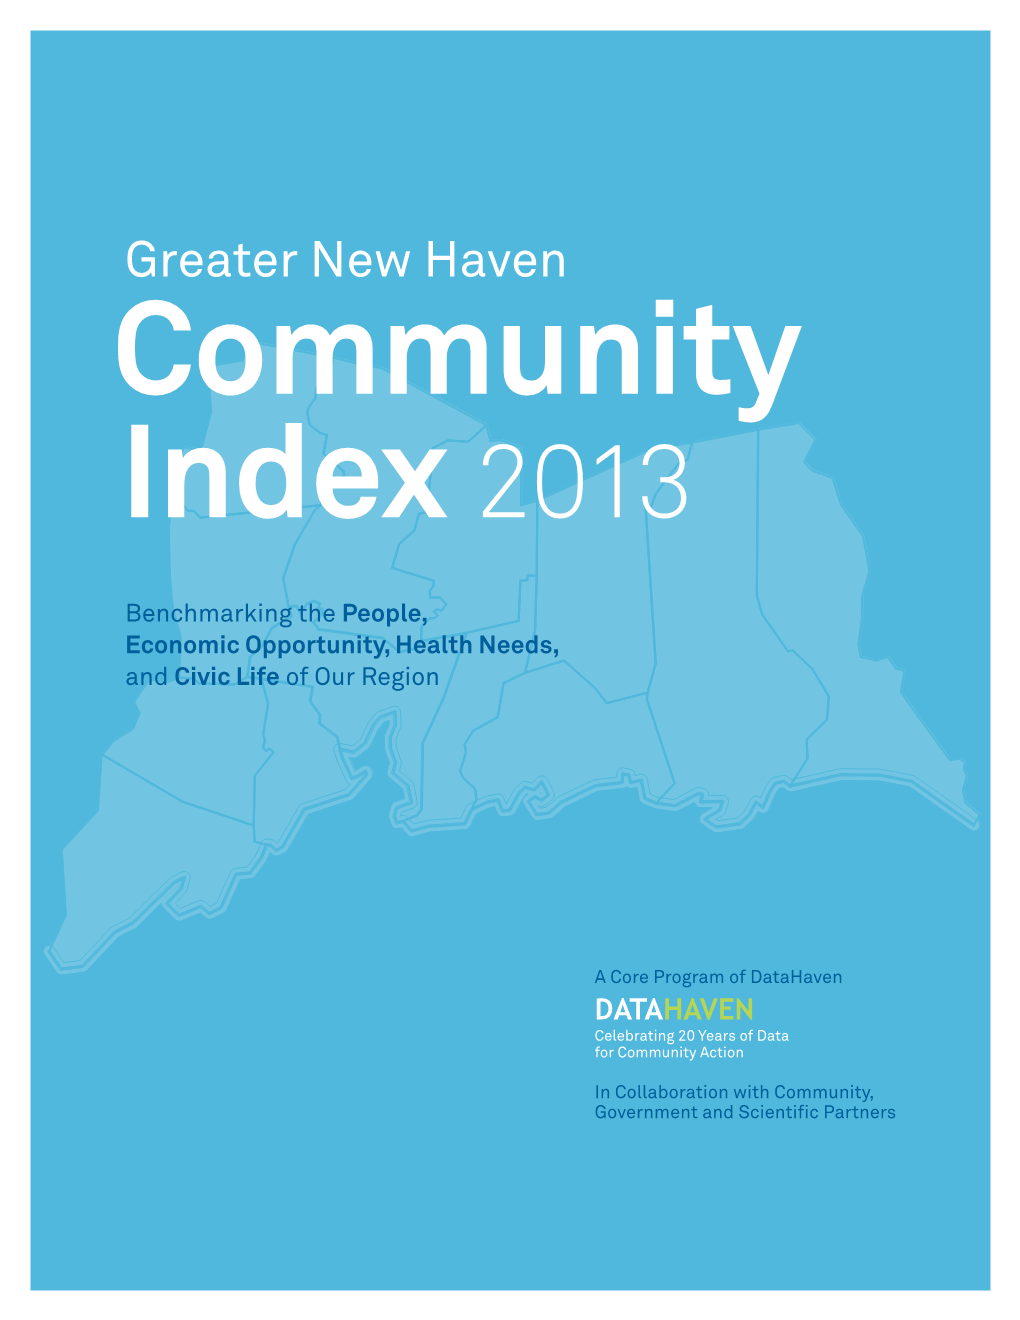 Greater New Haven Community Index 2013